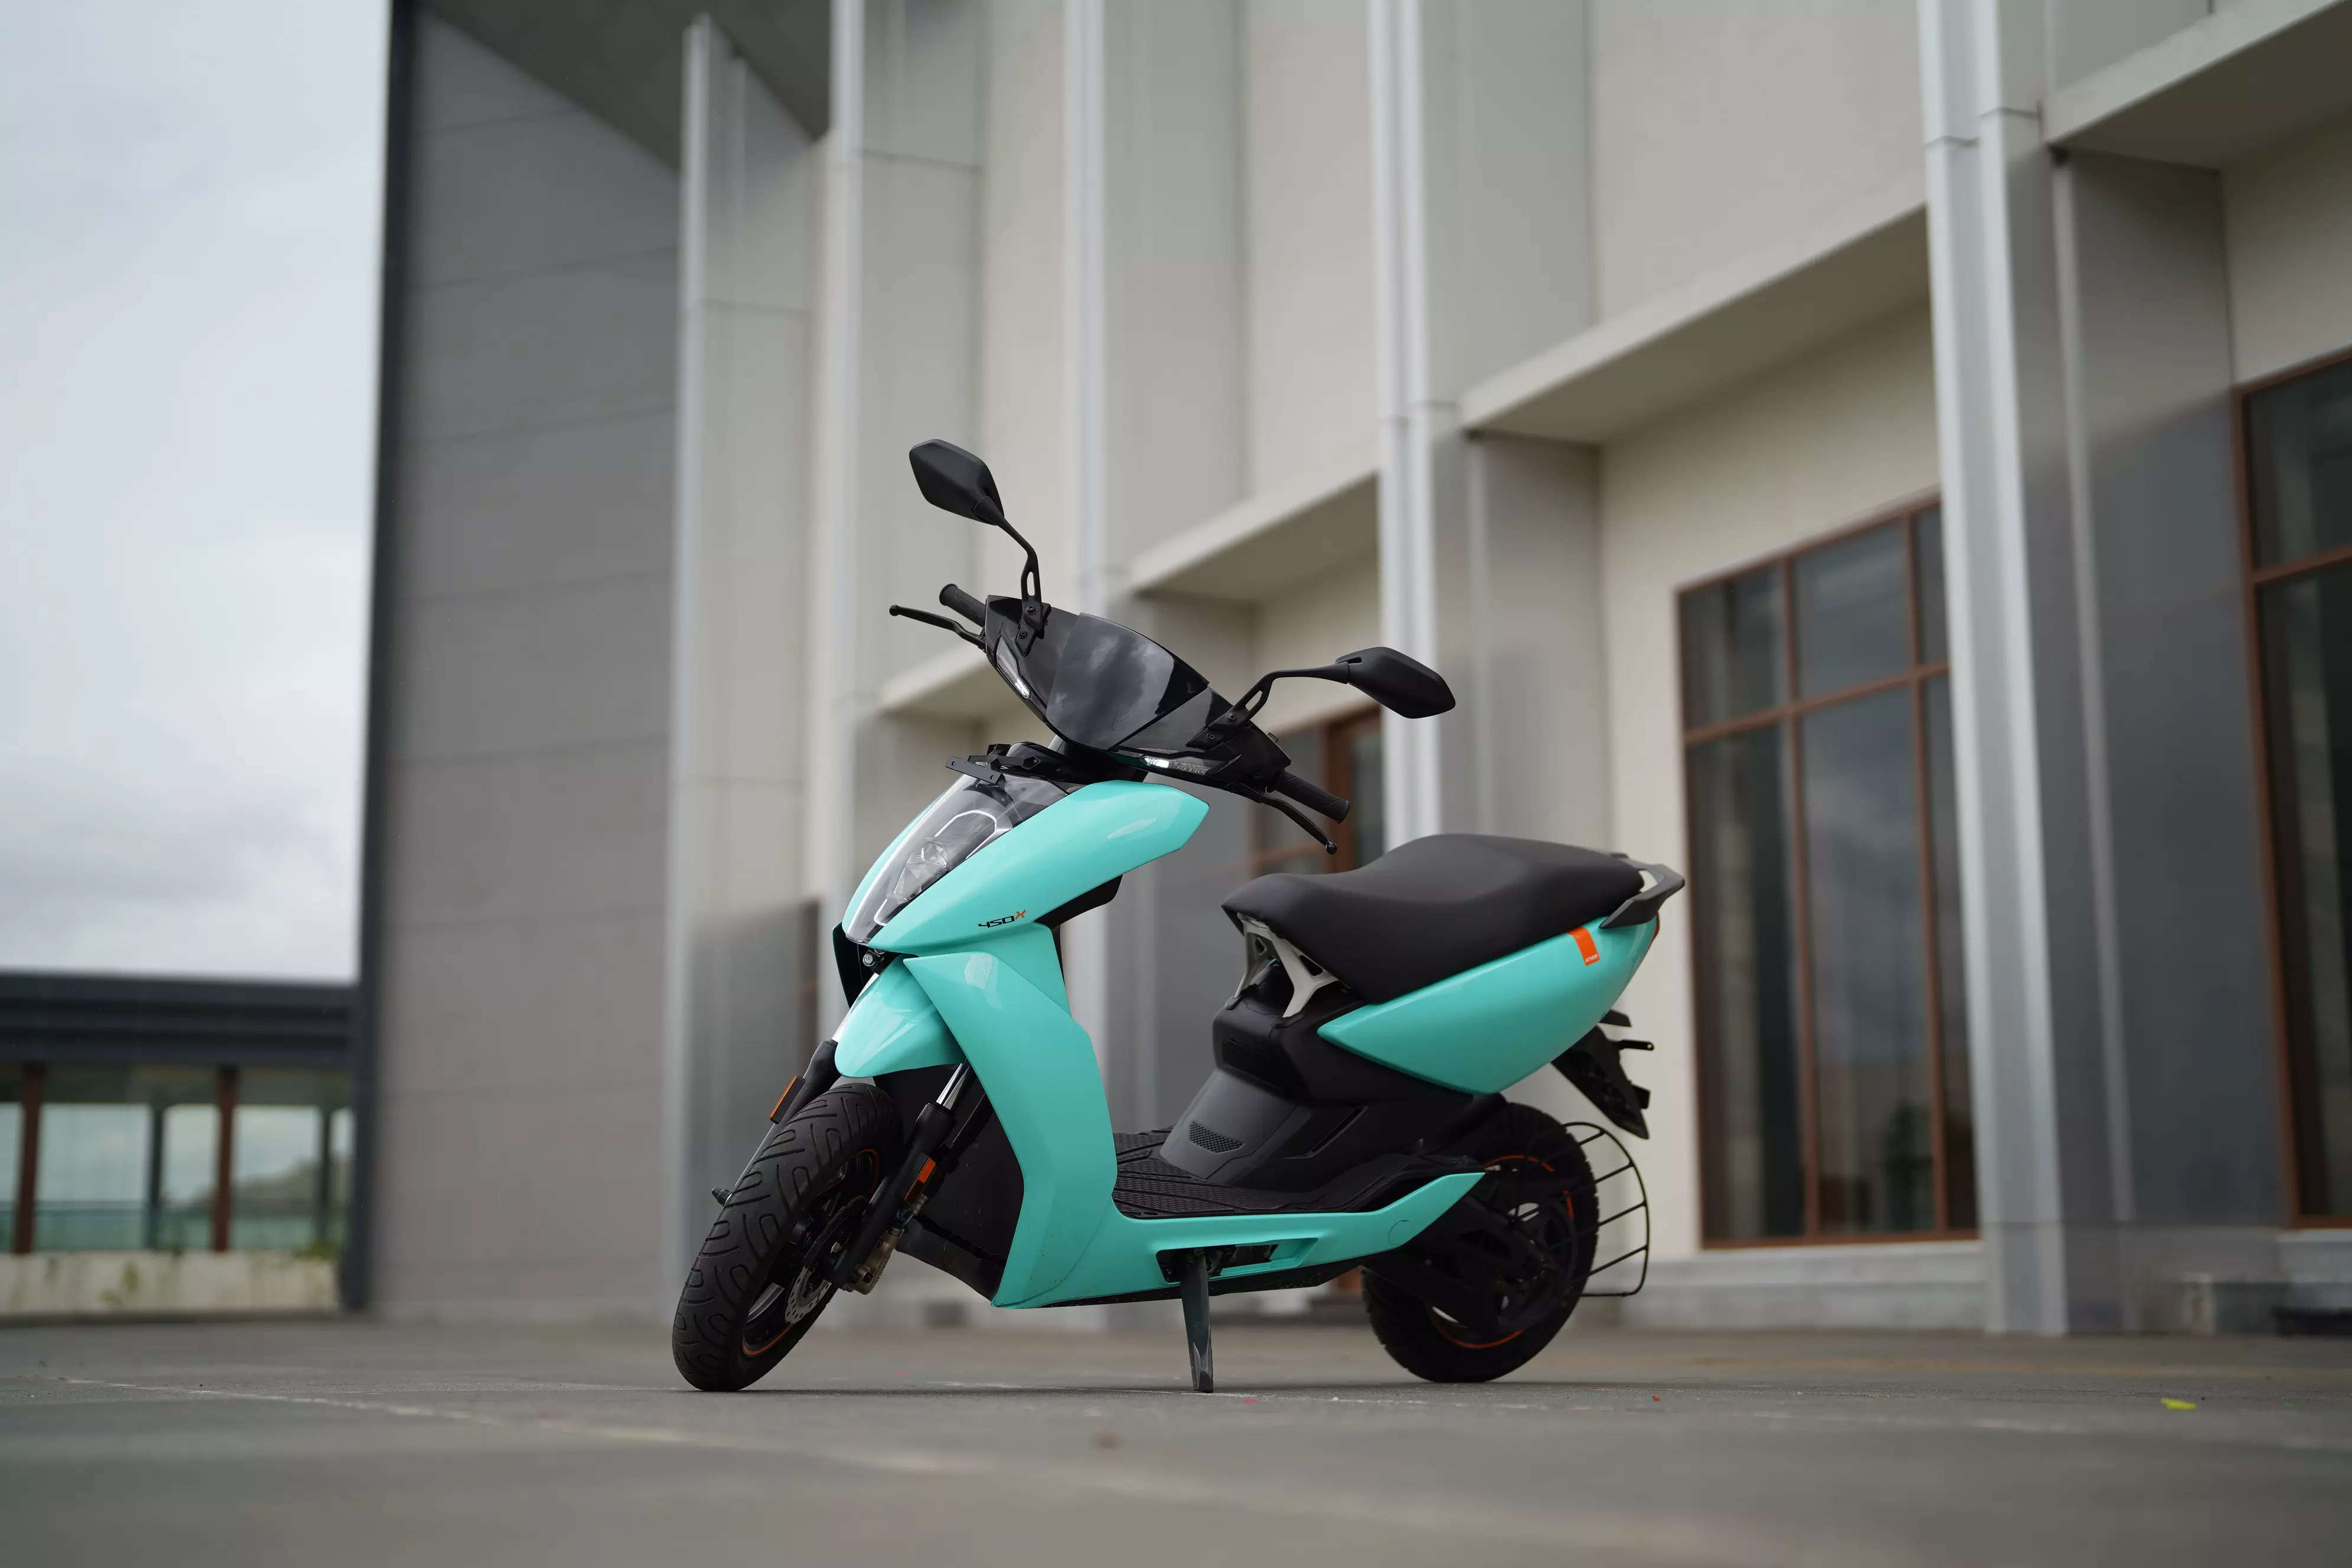  Ather Energy is also looking to expand the distribution network to 200 stores next year, from the current 50 outlets, and the expansion is expected to fuel demand going forward.